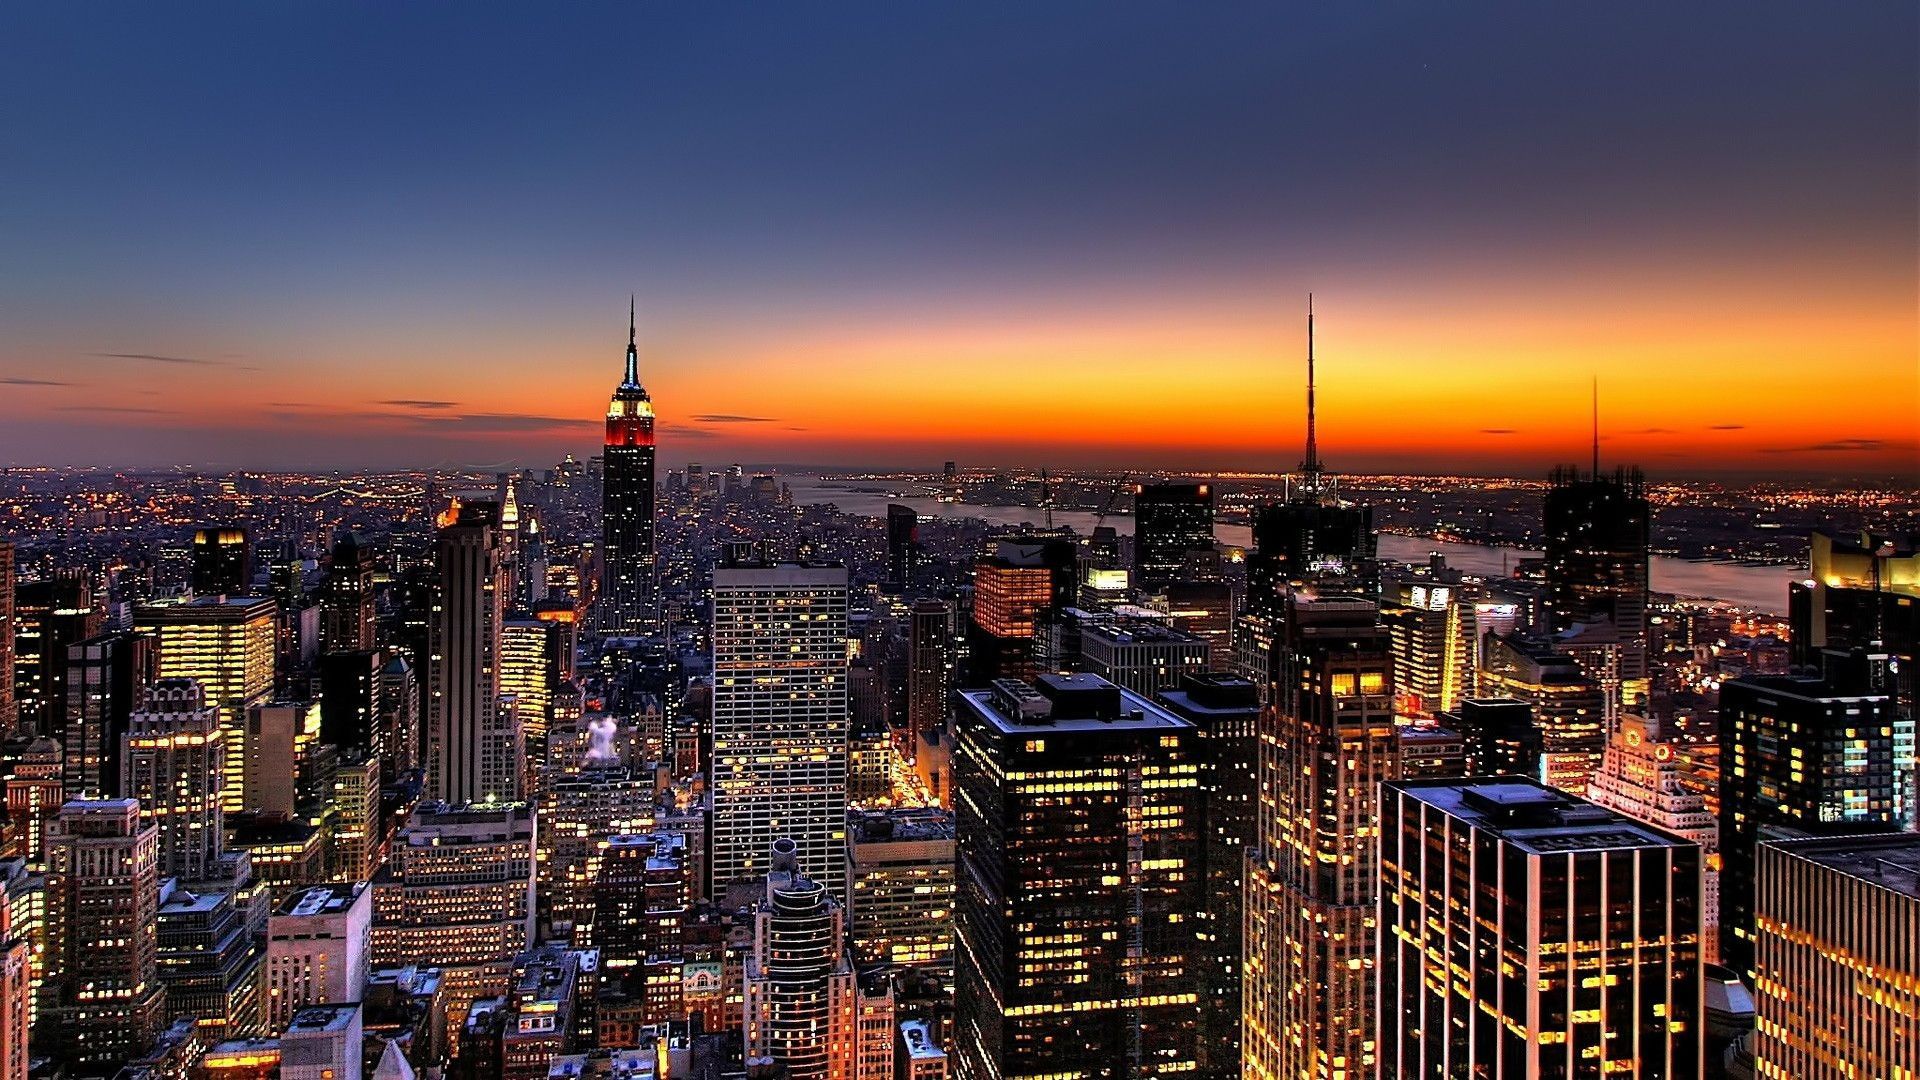 A city skyline at night with the sun setting - City, sunset, New York